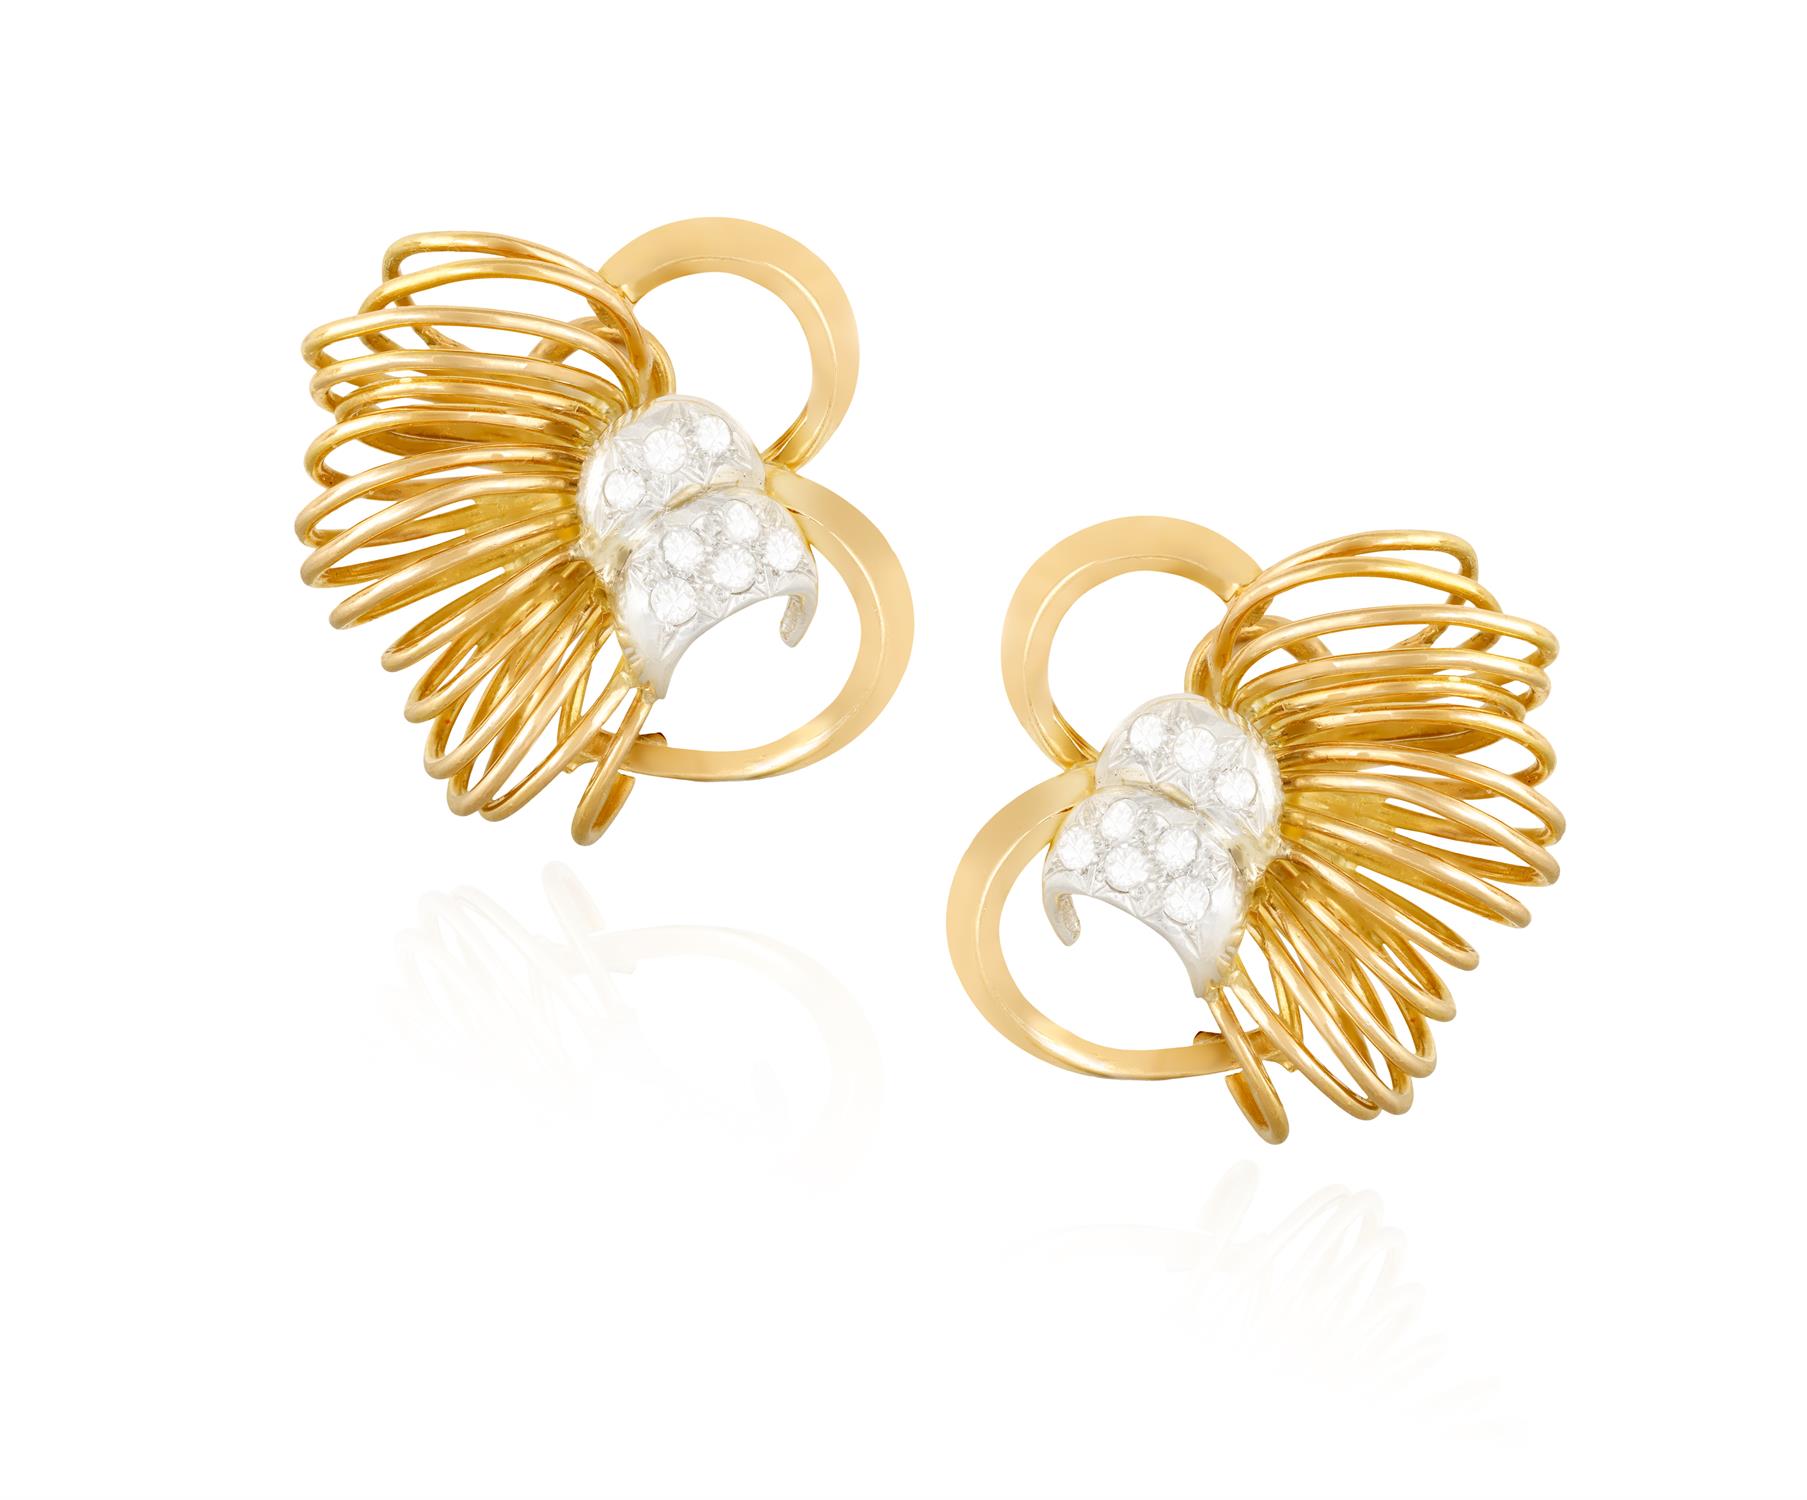 A PAIR OF DIAMOND EARRINGS, BY STERLÉ, CIRCA 1950 Of openwork design with gold wire loop - Image 2 of 10